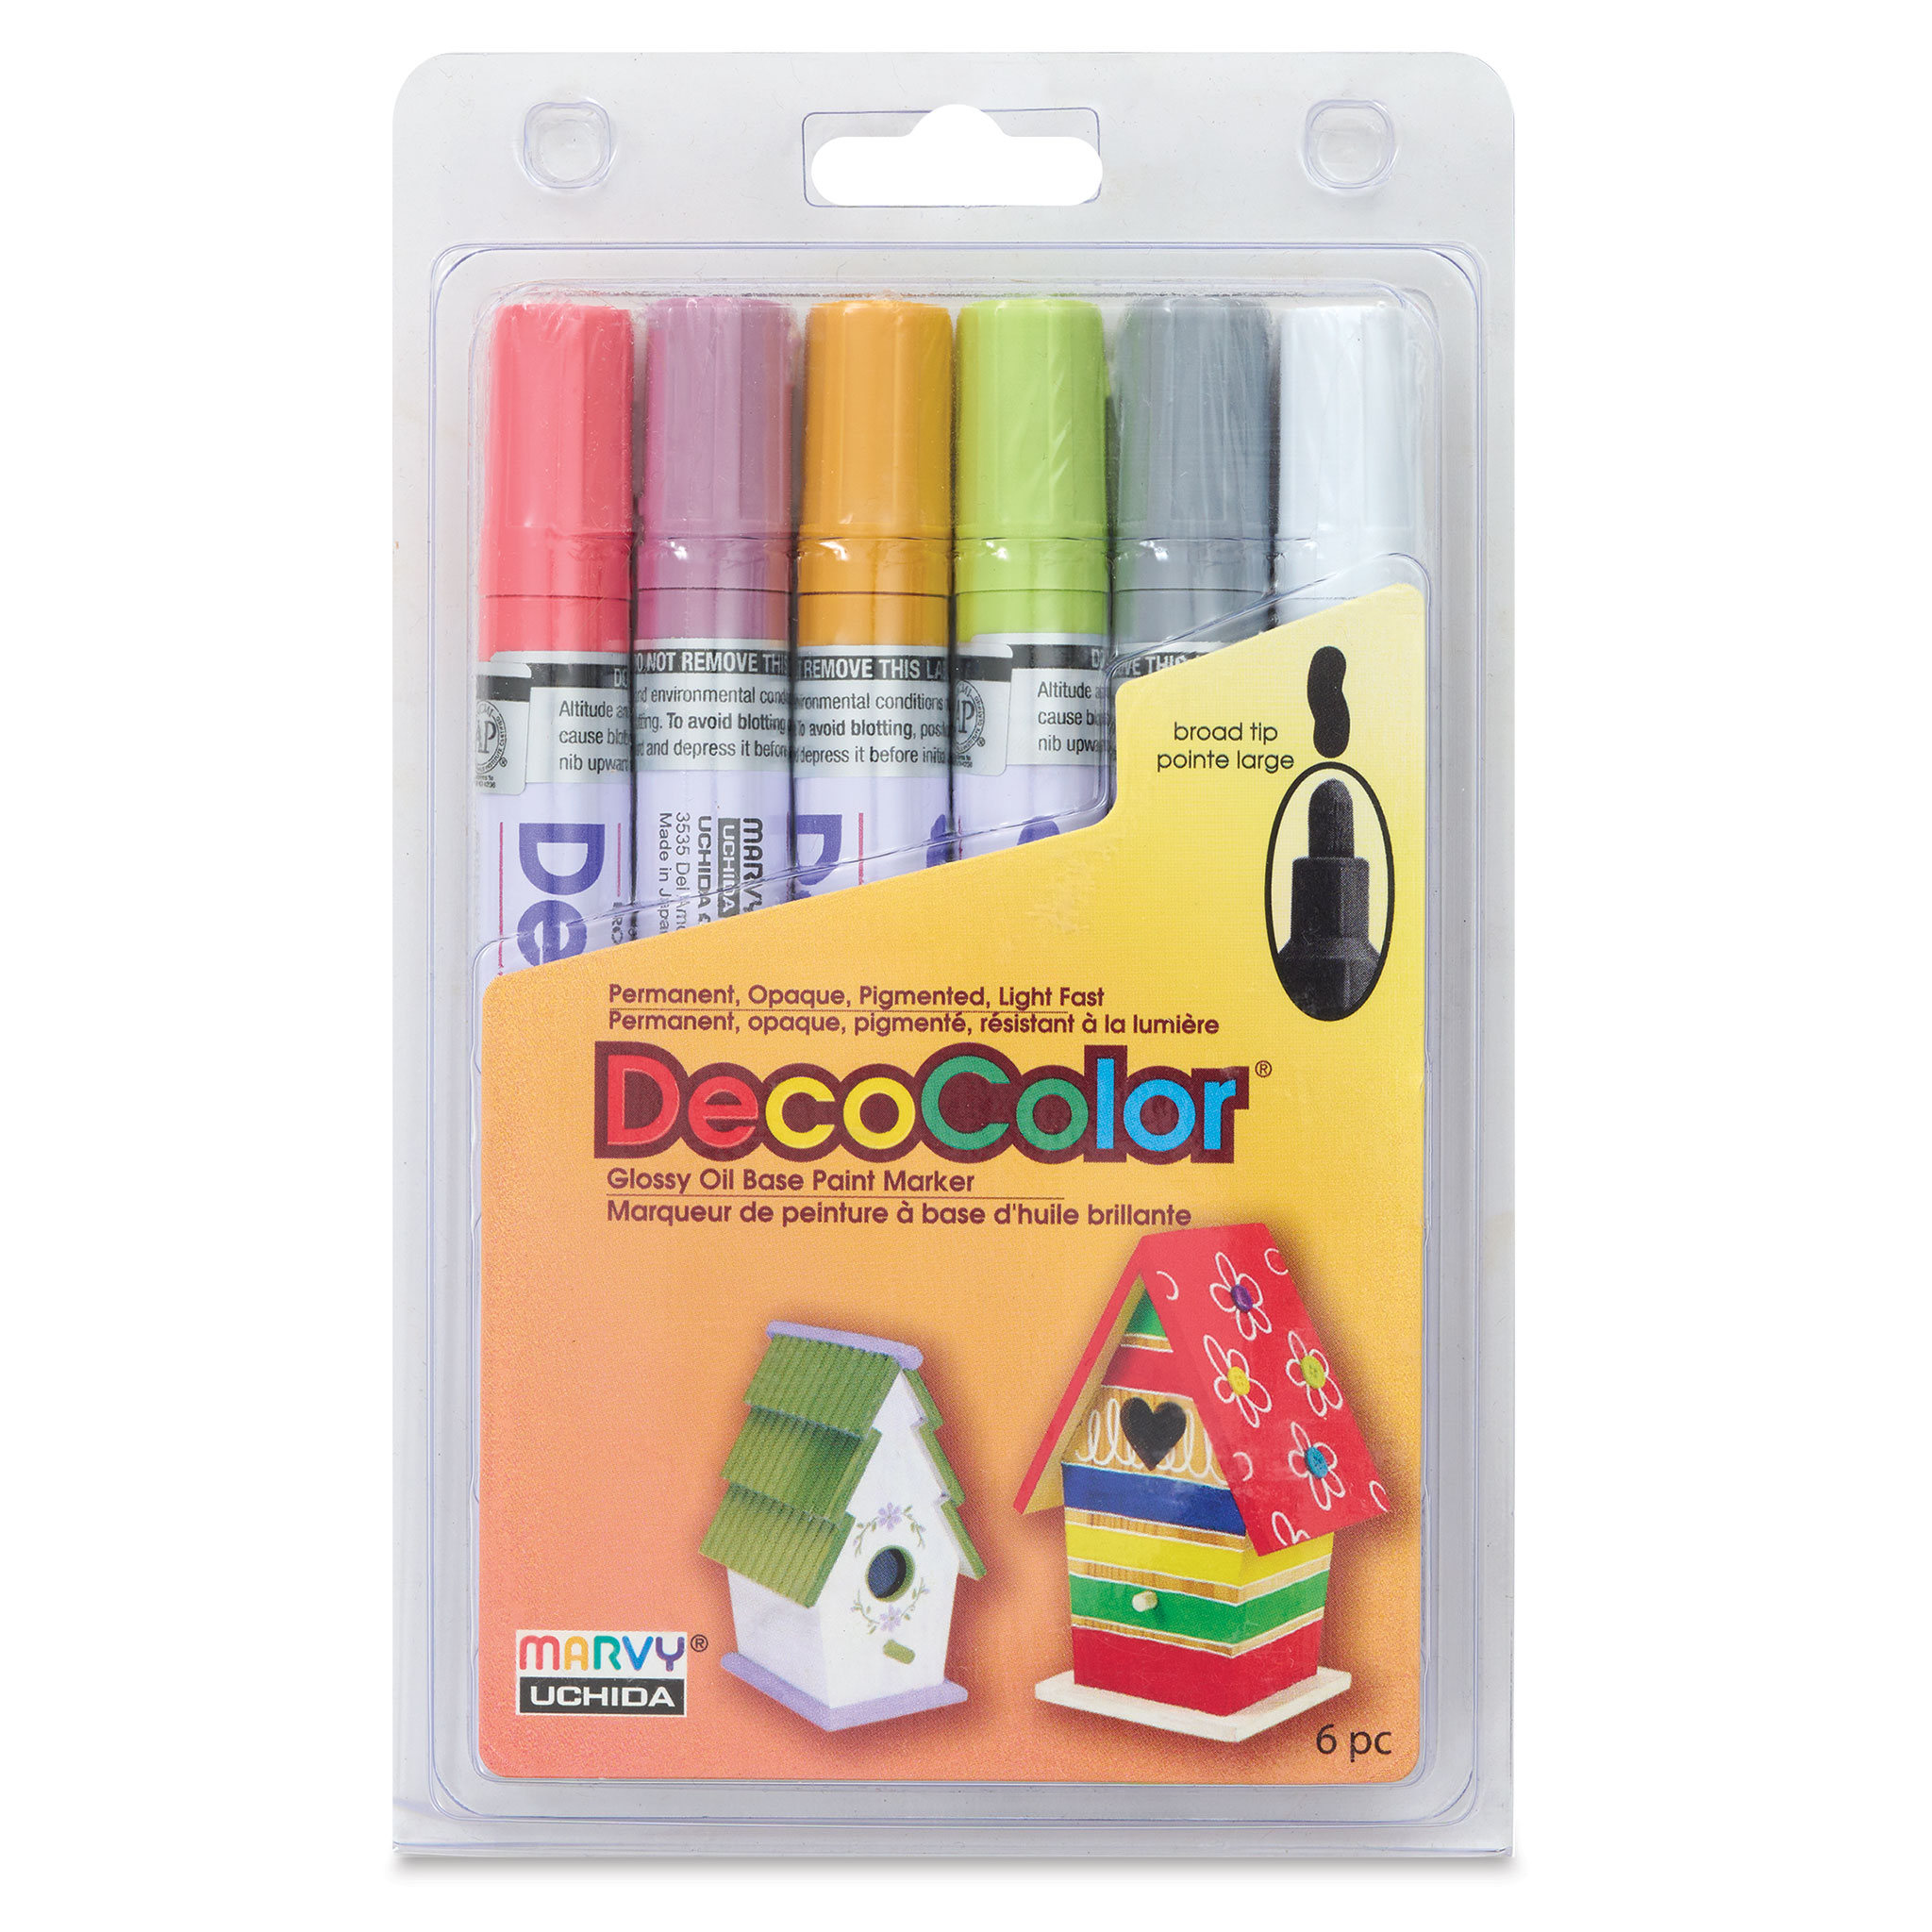 Marvy Decocolor Paint Markers